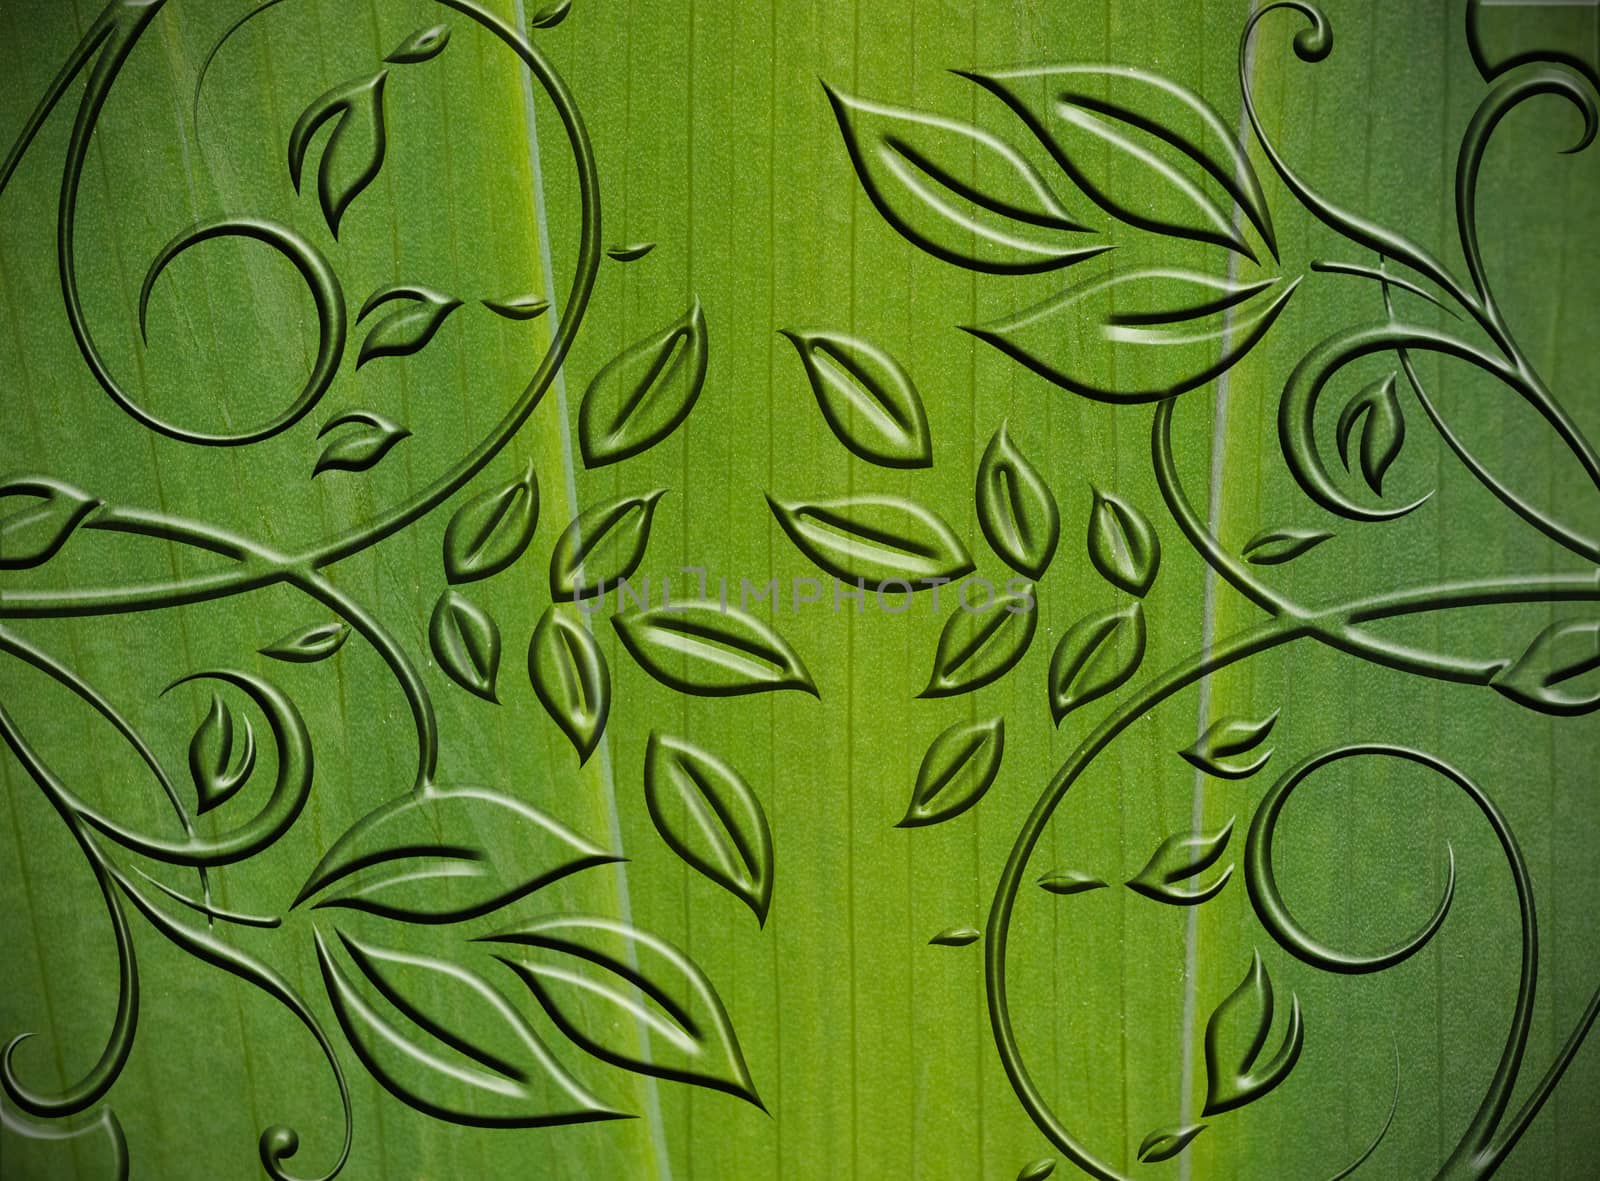 green floral abstract background